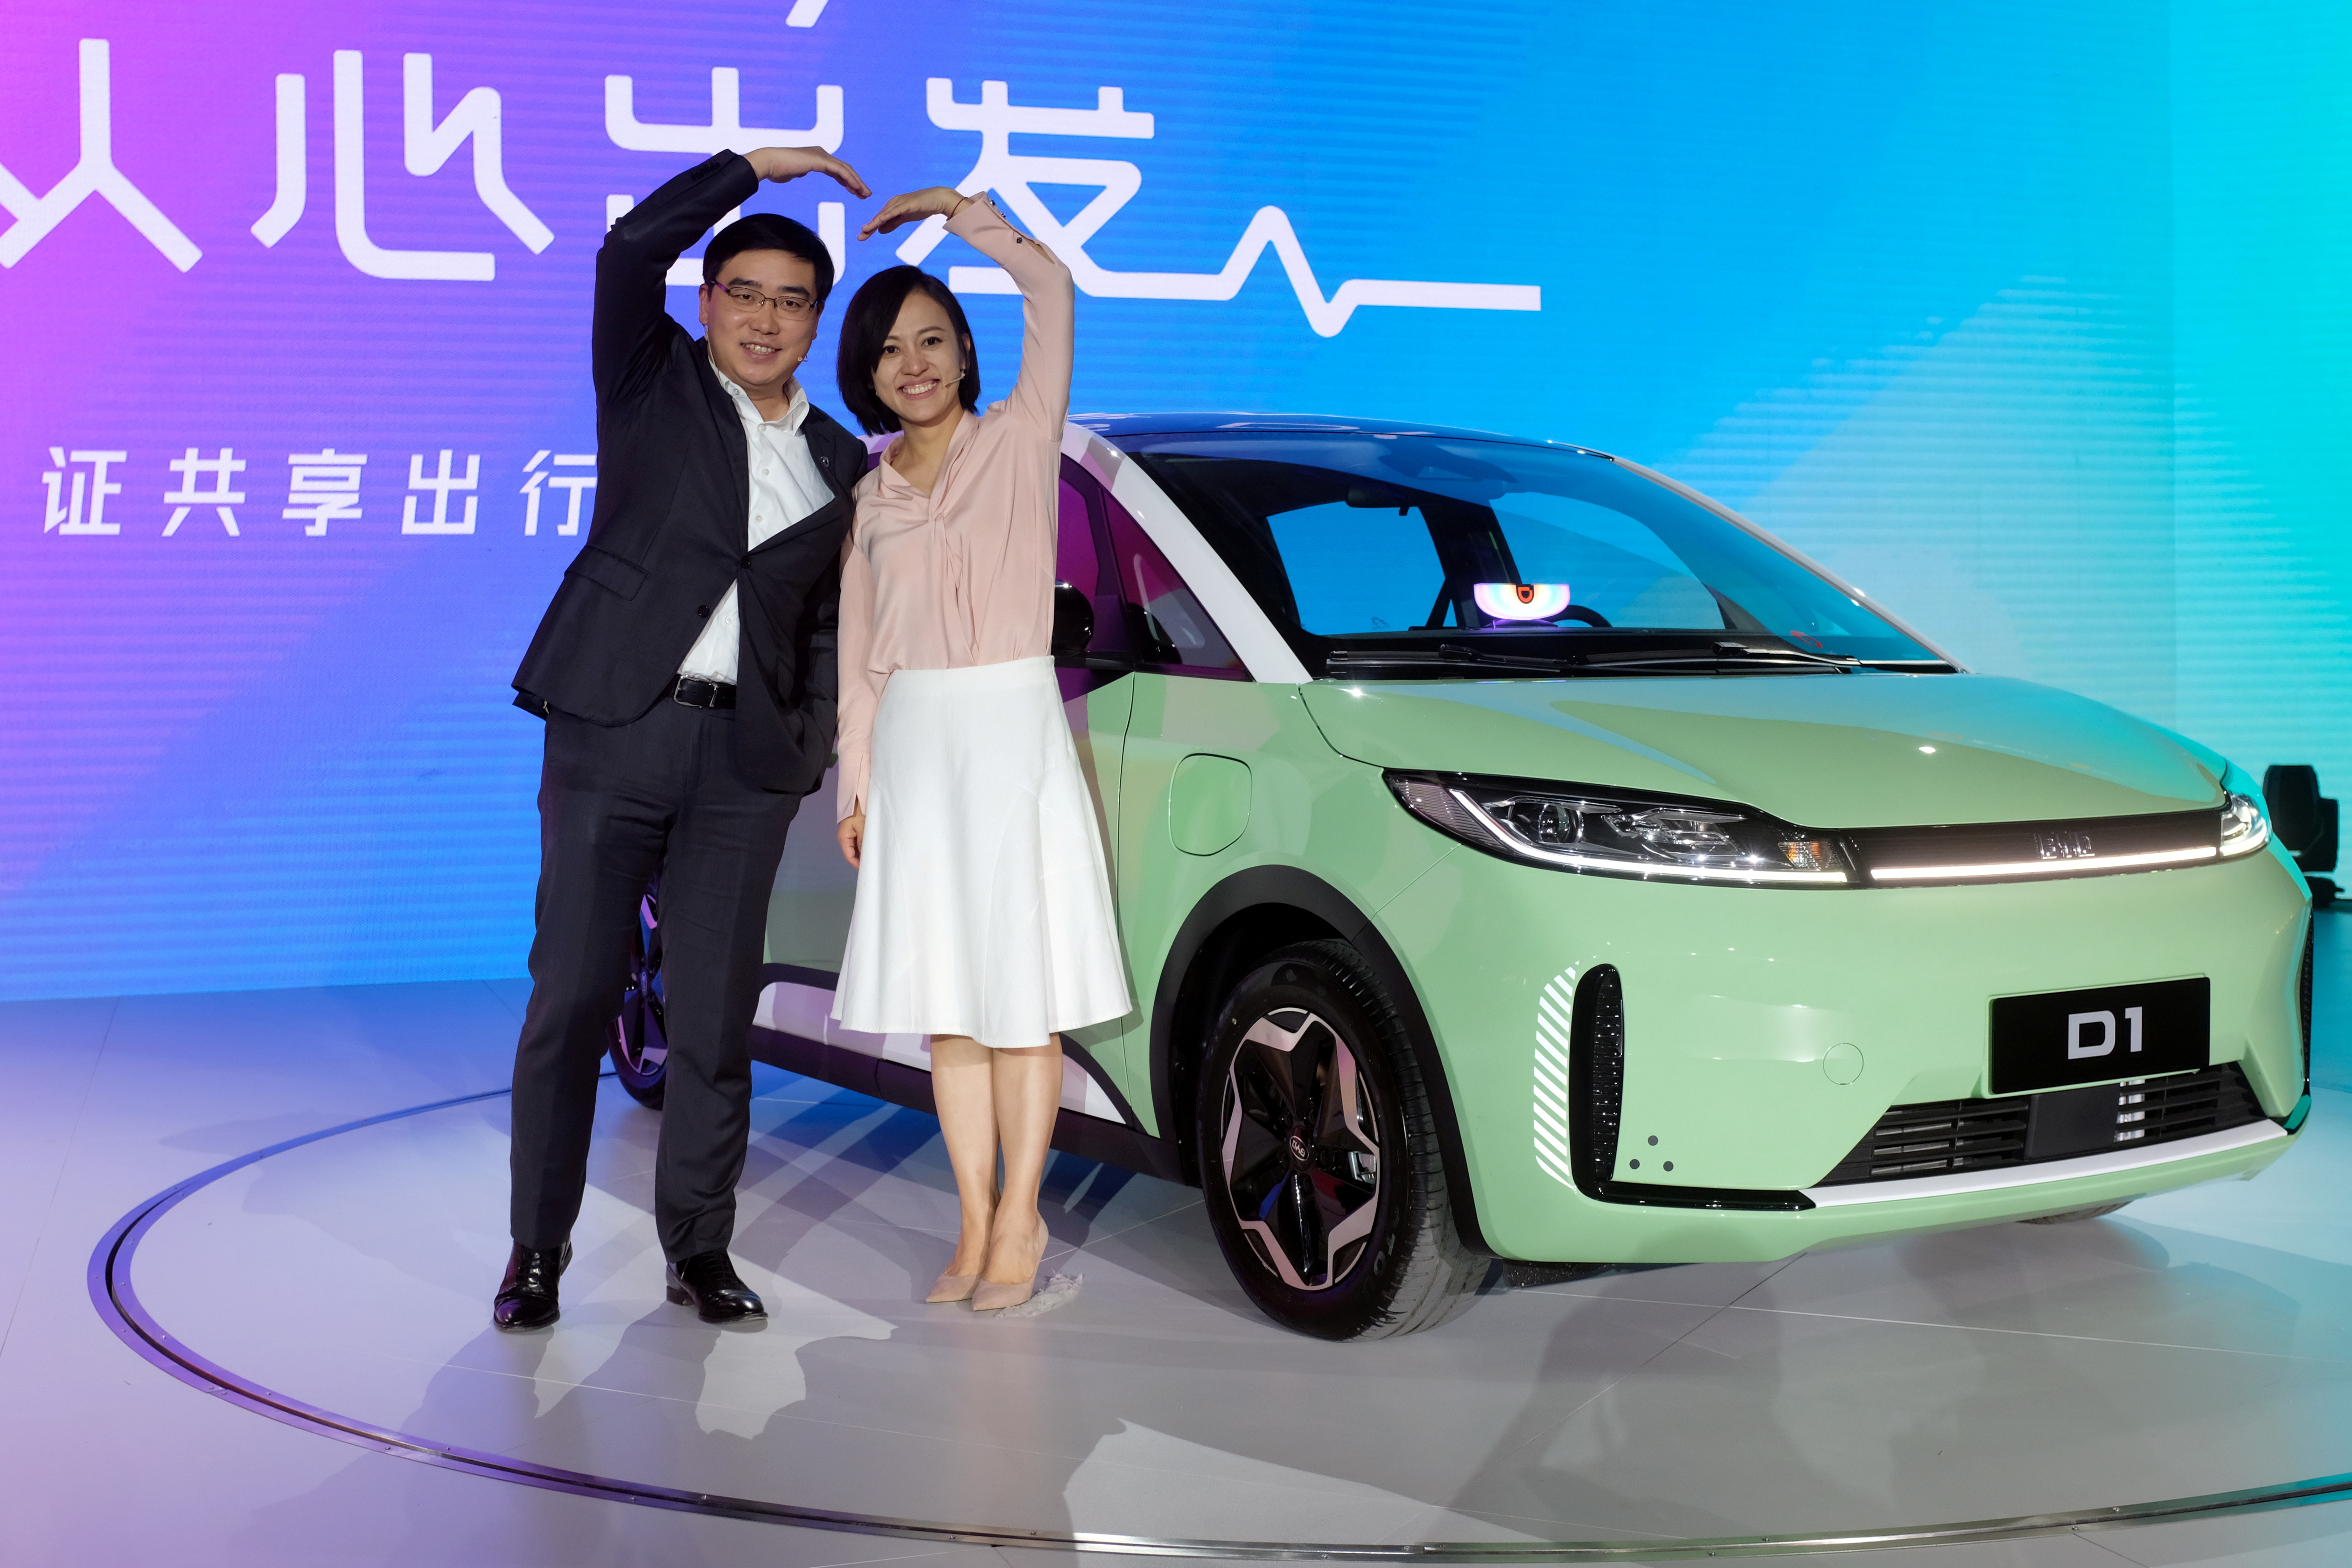 Didi Chuxing's CEO Will Cheng and President Jean Liu attend a launch event in Beijing